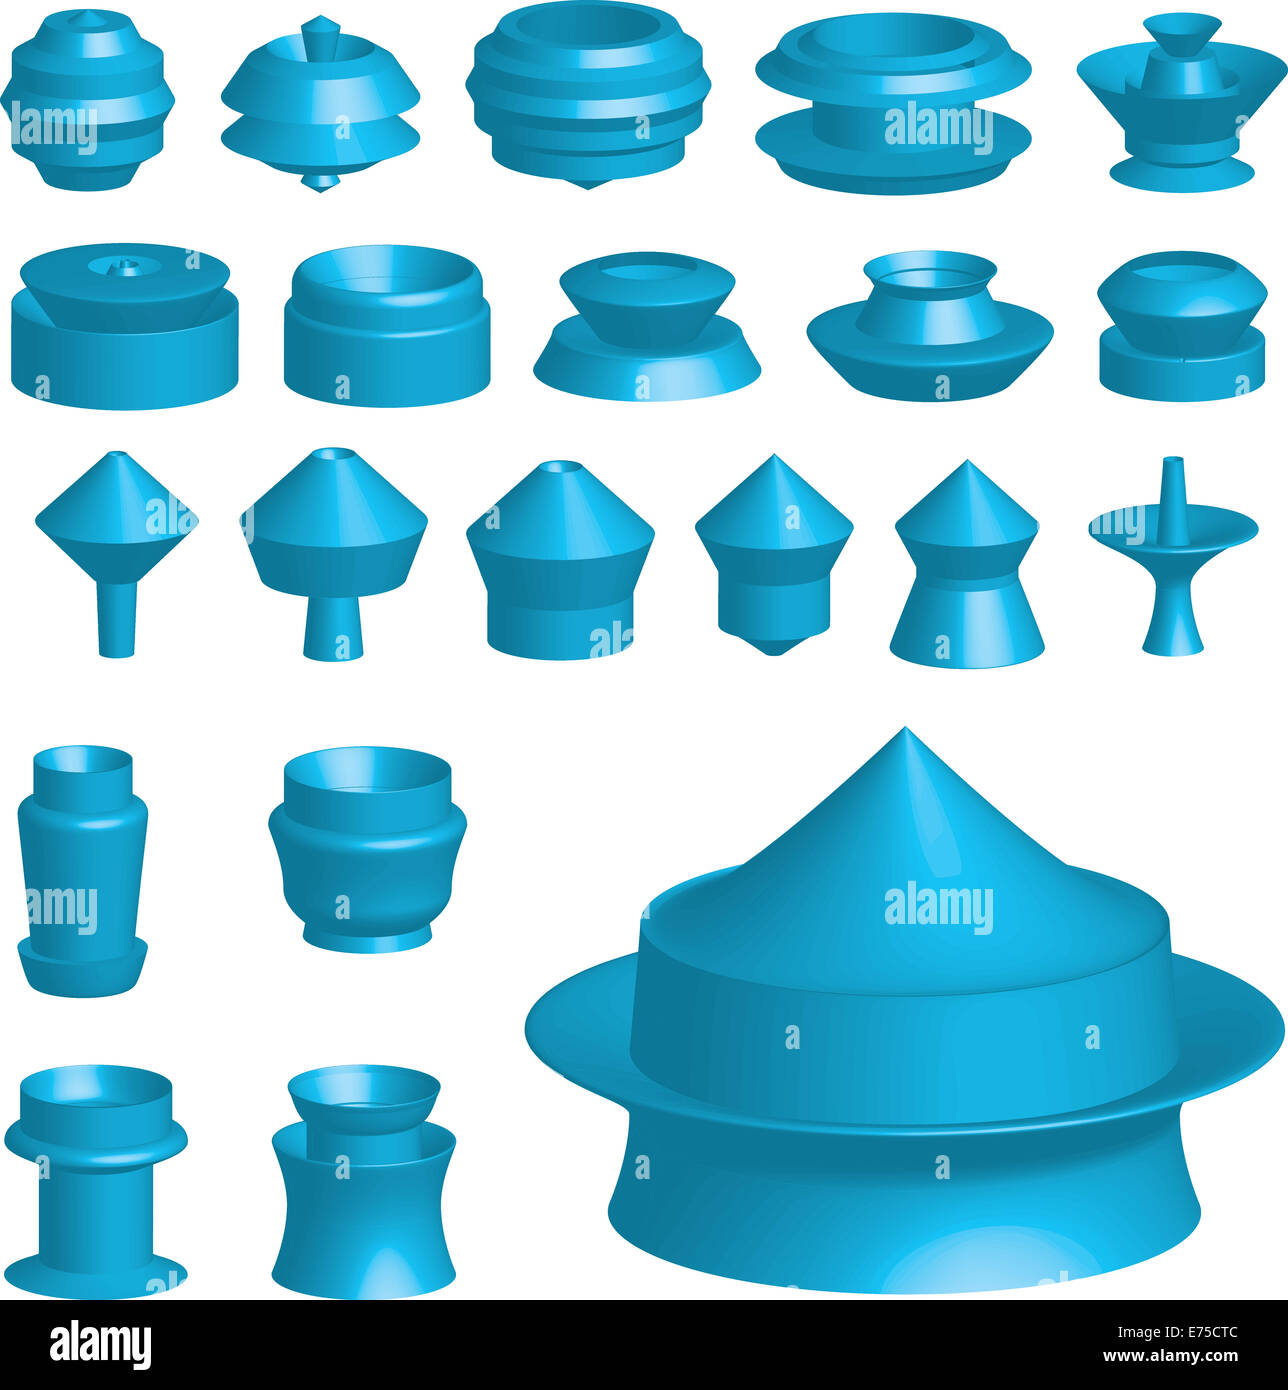 An Illustration of various 3d shapes on white background Stock Photo